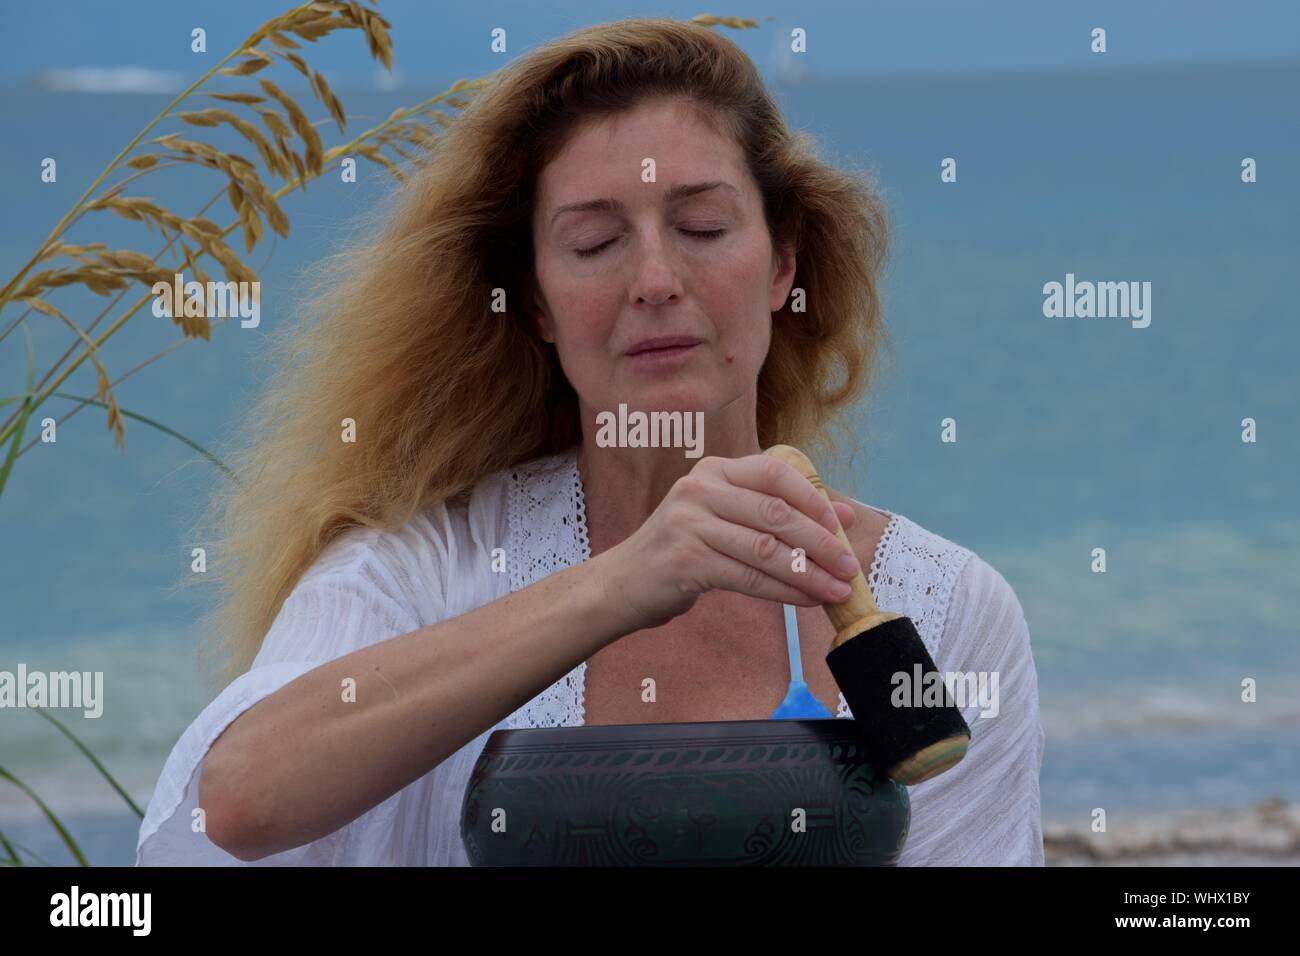 Woman Meditating With Singing Bowl With Wooden Striker At Beach Stock Photo